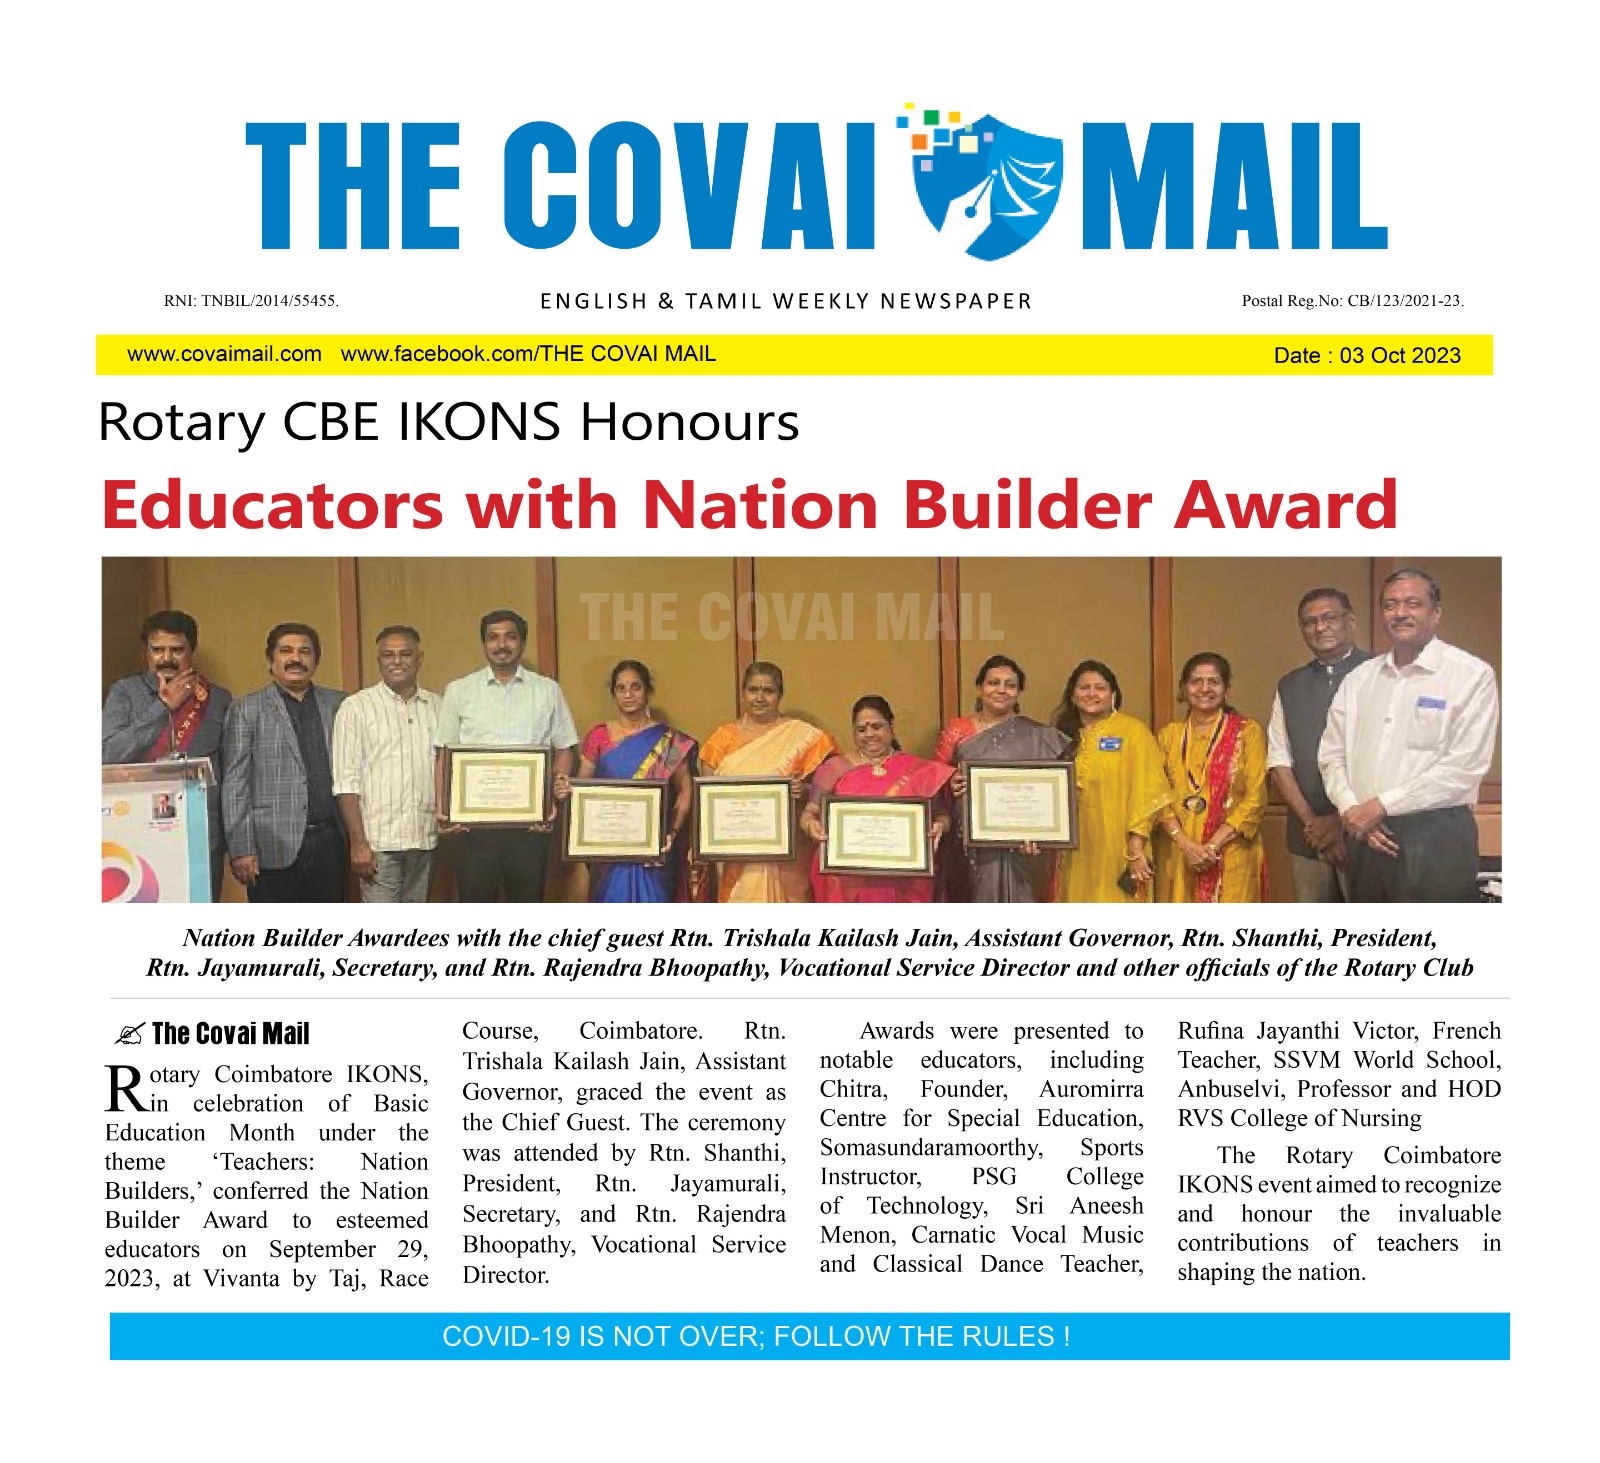 Educators with Nation Builder Award